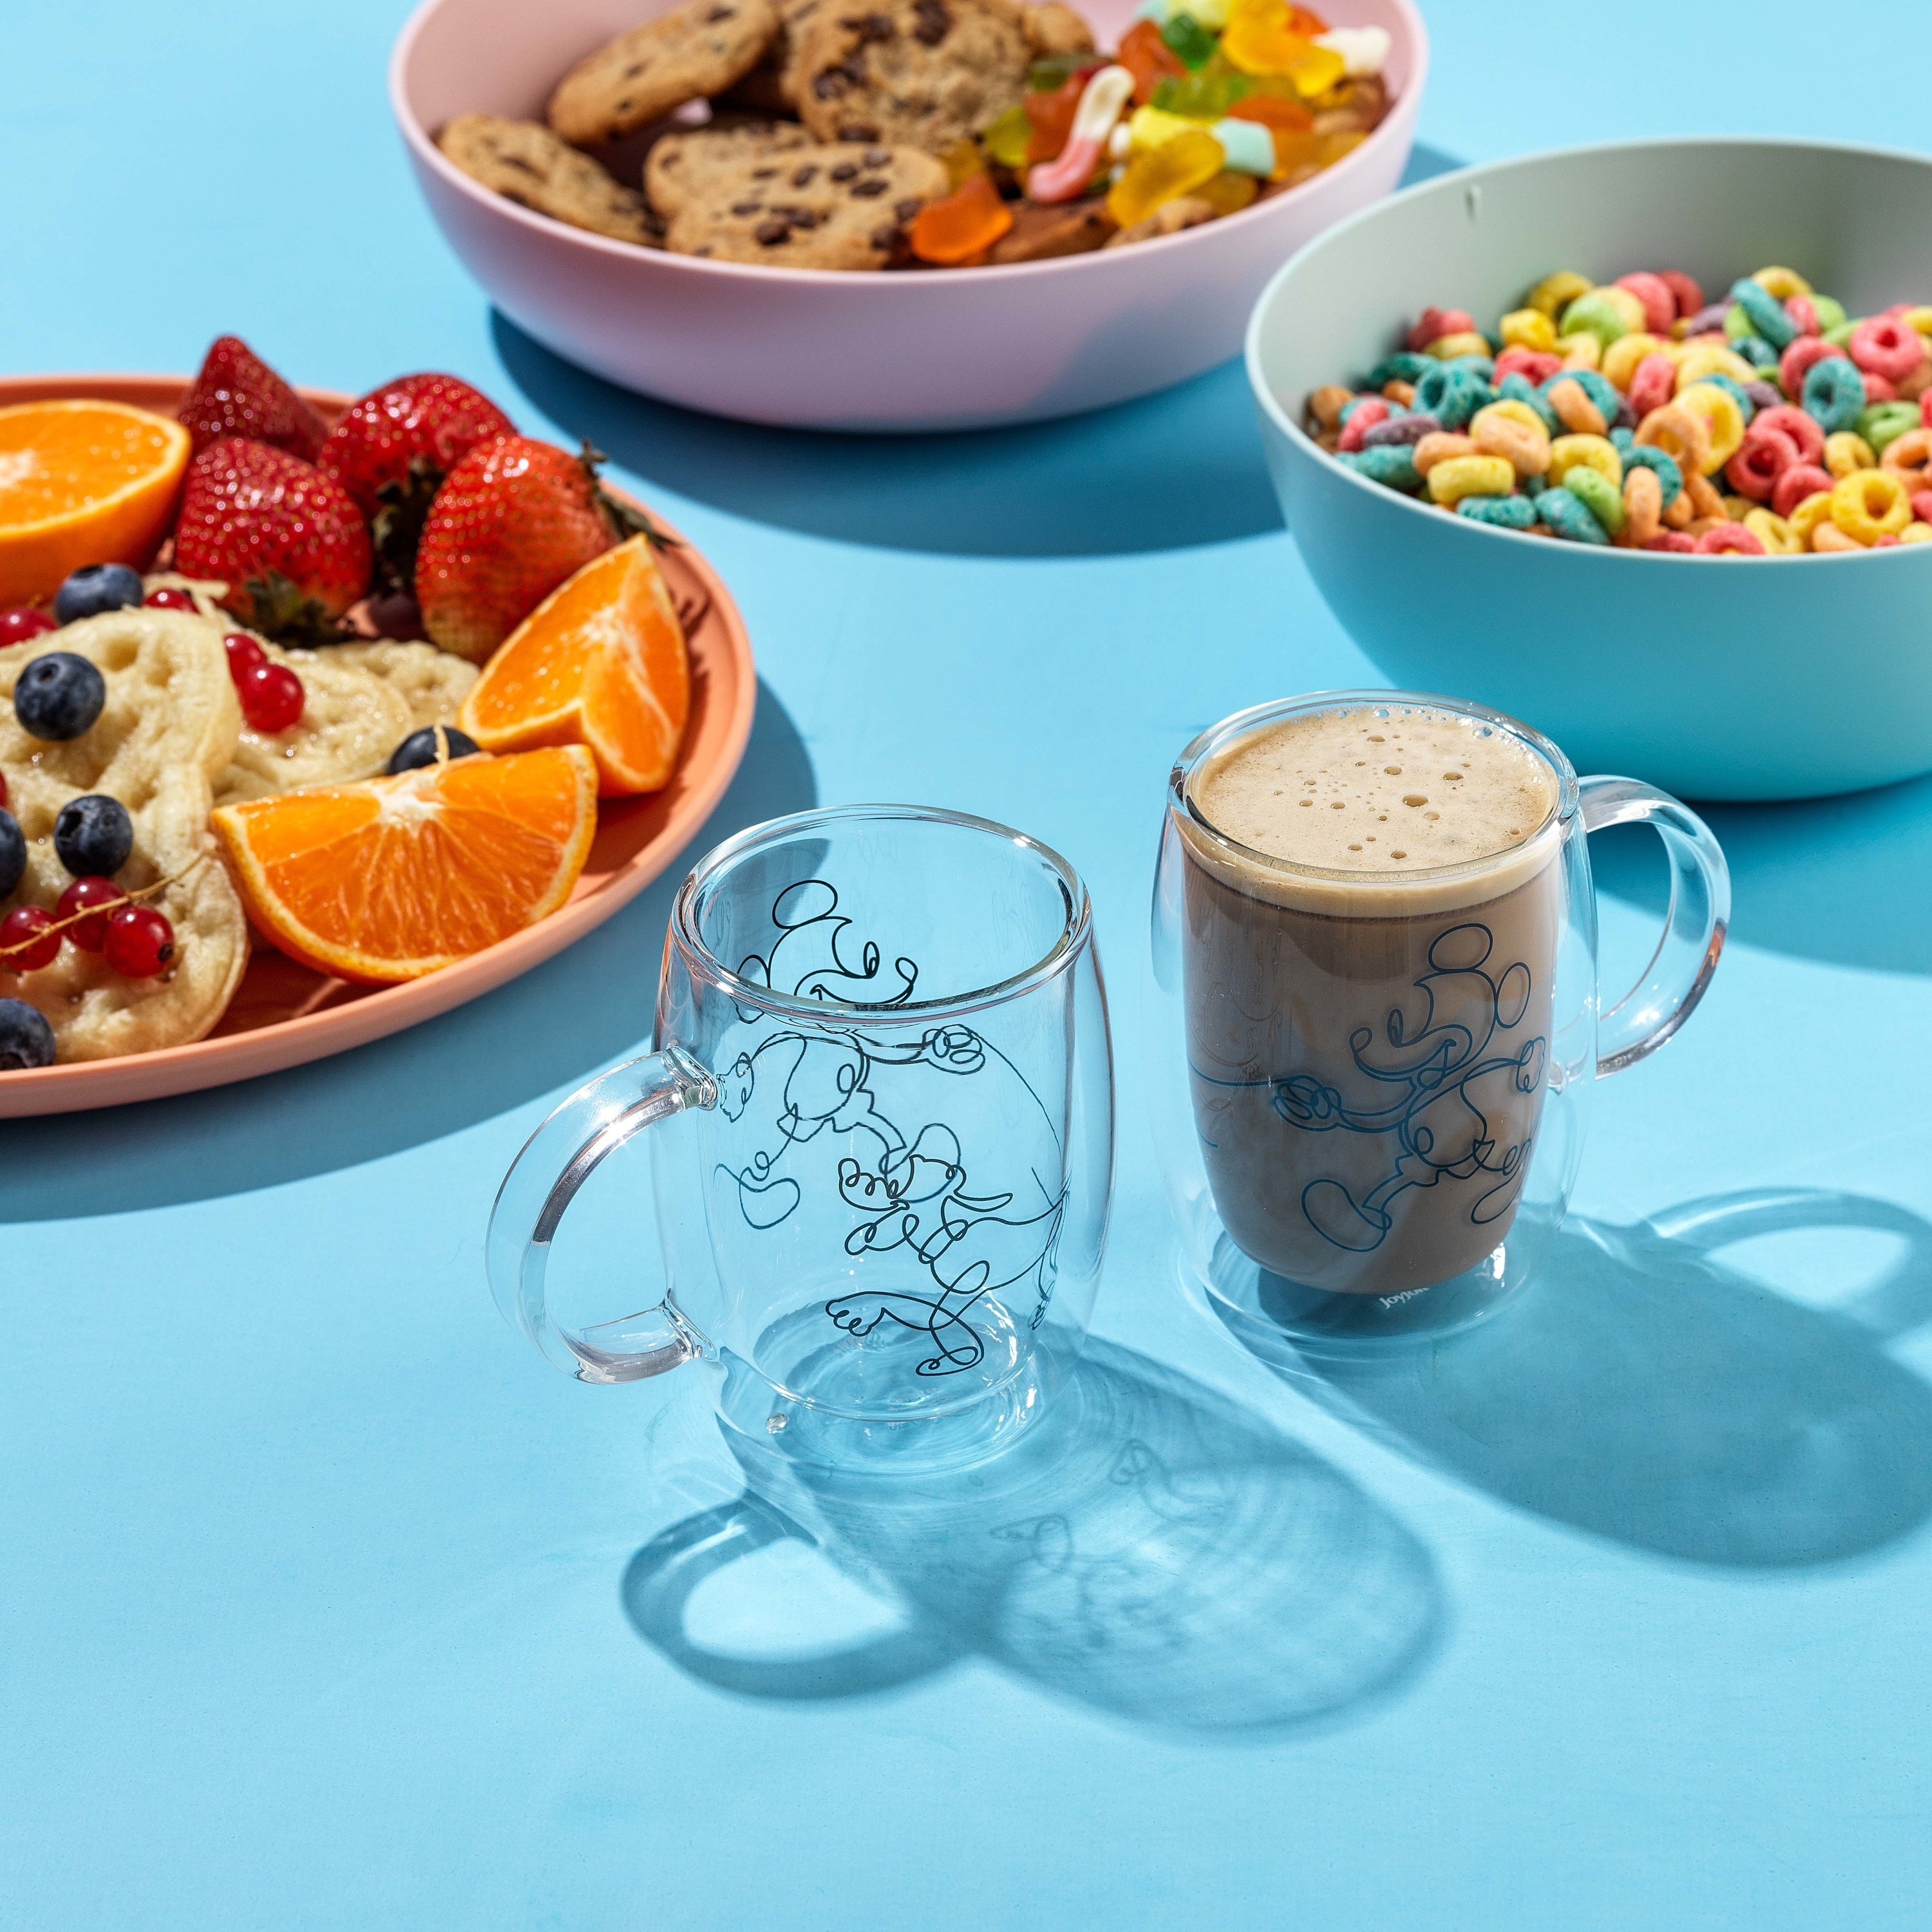 https://ak1.ostkcdn.com/images/products/is/images/direct/b10c3062a452c6ed570a8ce6a01c656646d8f741/JoyJolt-Disney-Mickey-and-Pluto-Glass-Mugs---Set-of-2-Double-Wall-Tea-Glass-Espresso-Coffee-Cups---5.4-oz.jpg